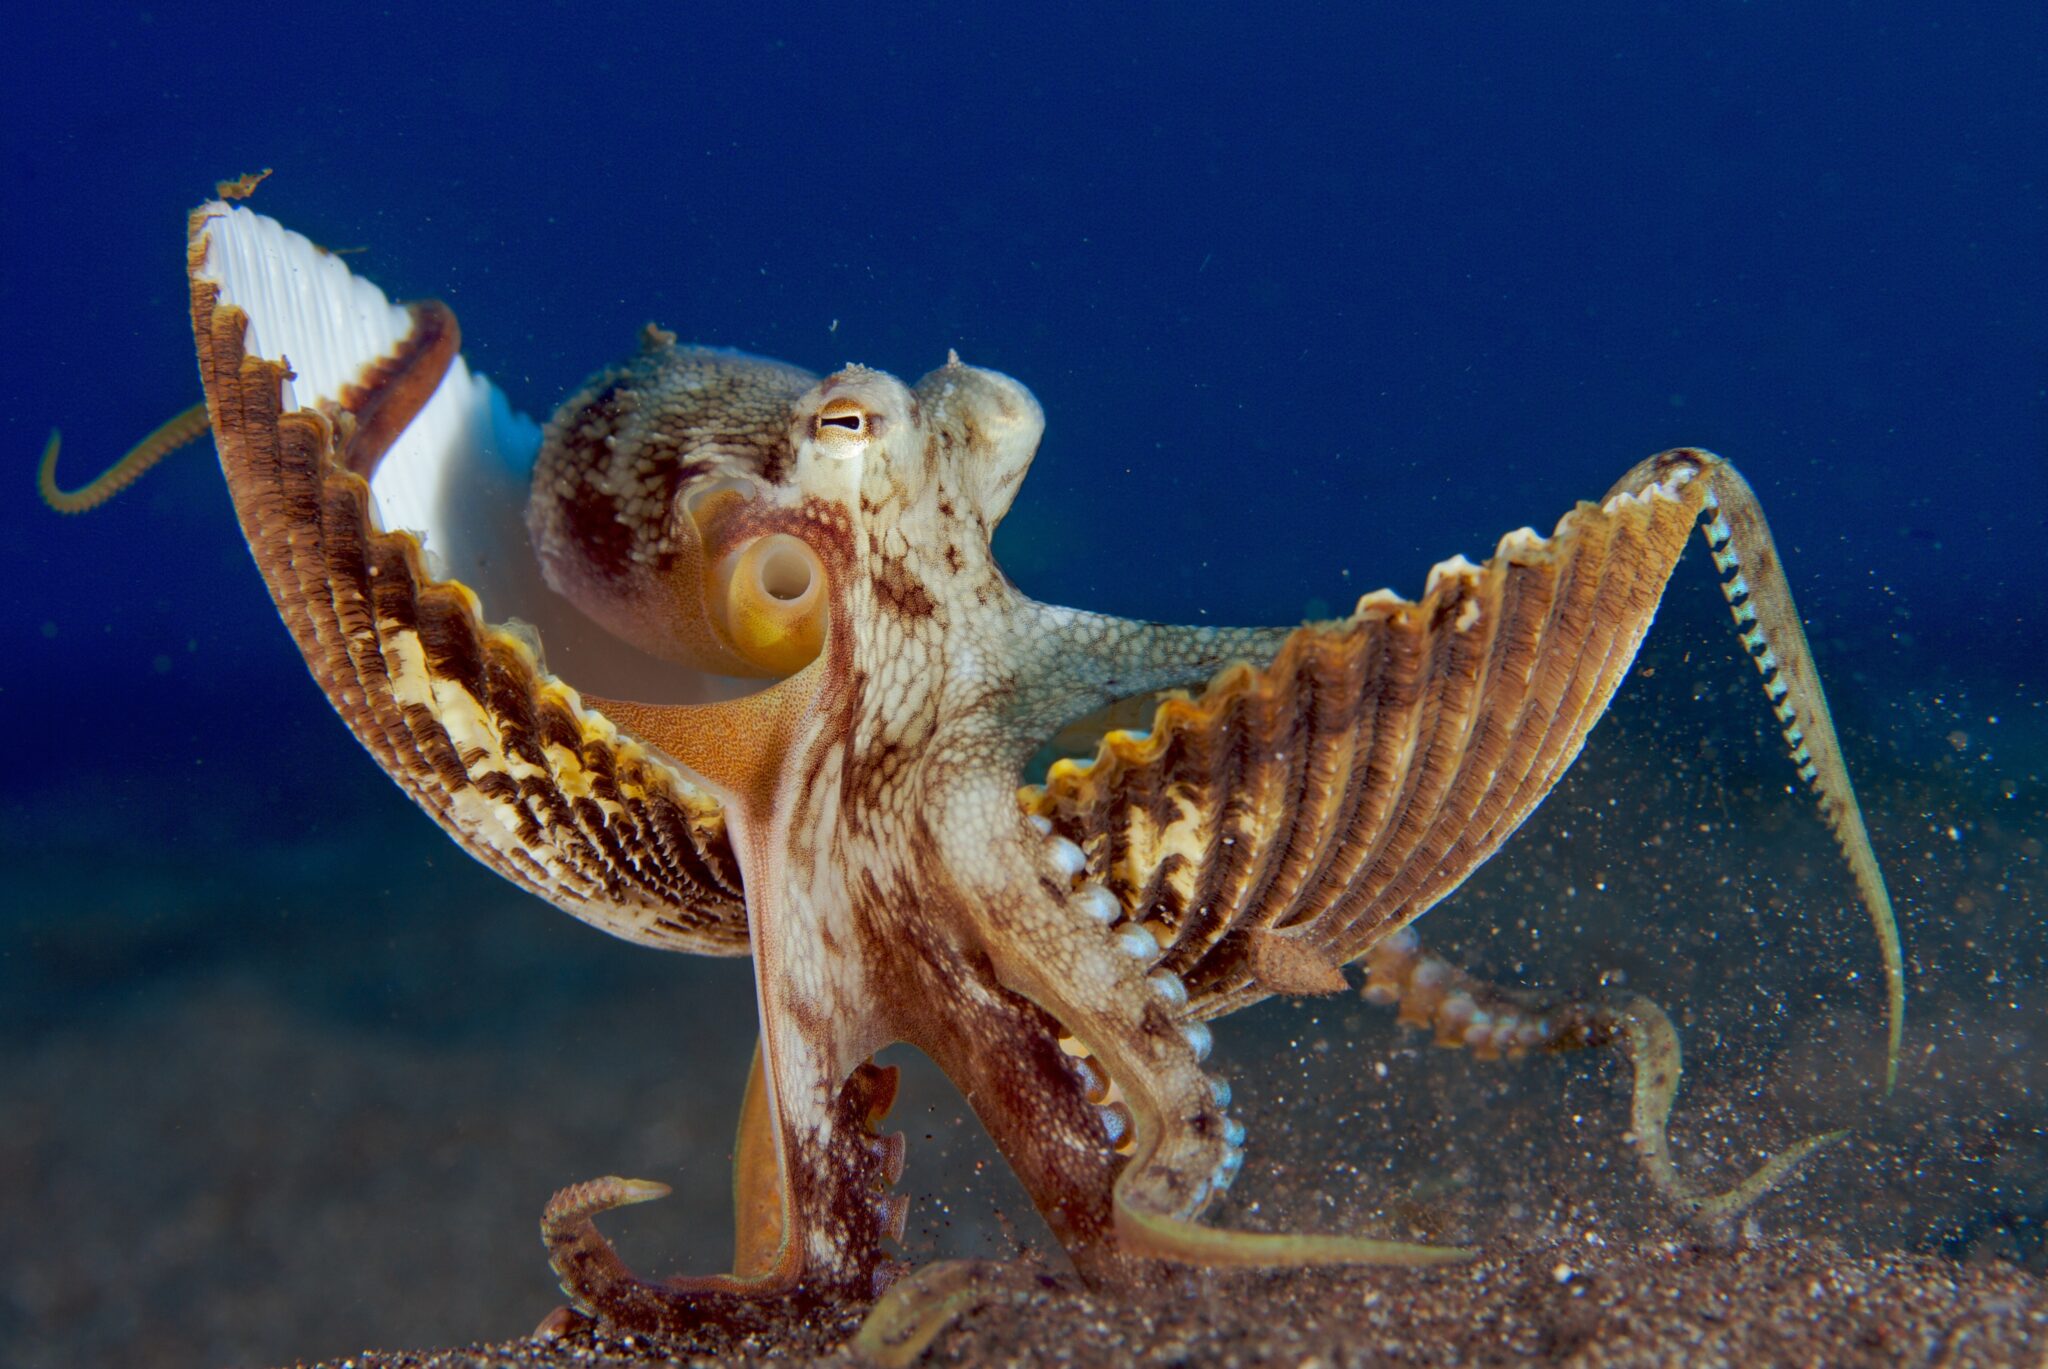 A coconut octopus walking along the seafloor with a shell in Lembeh Indonesia